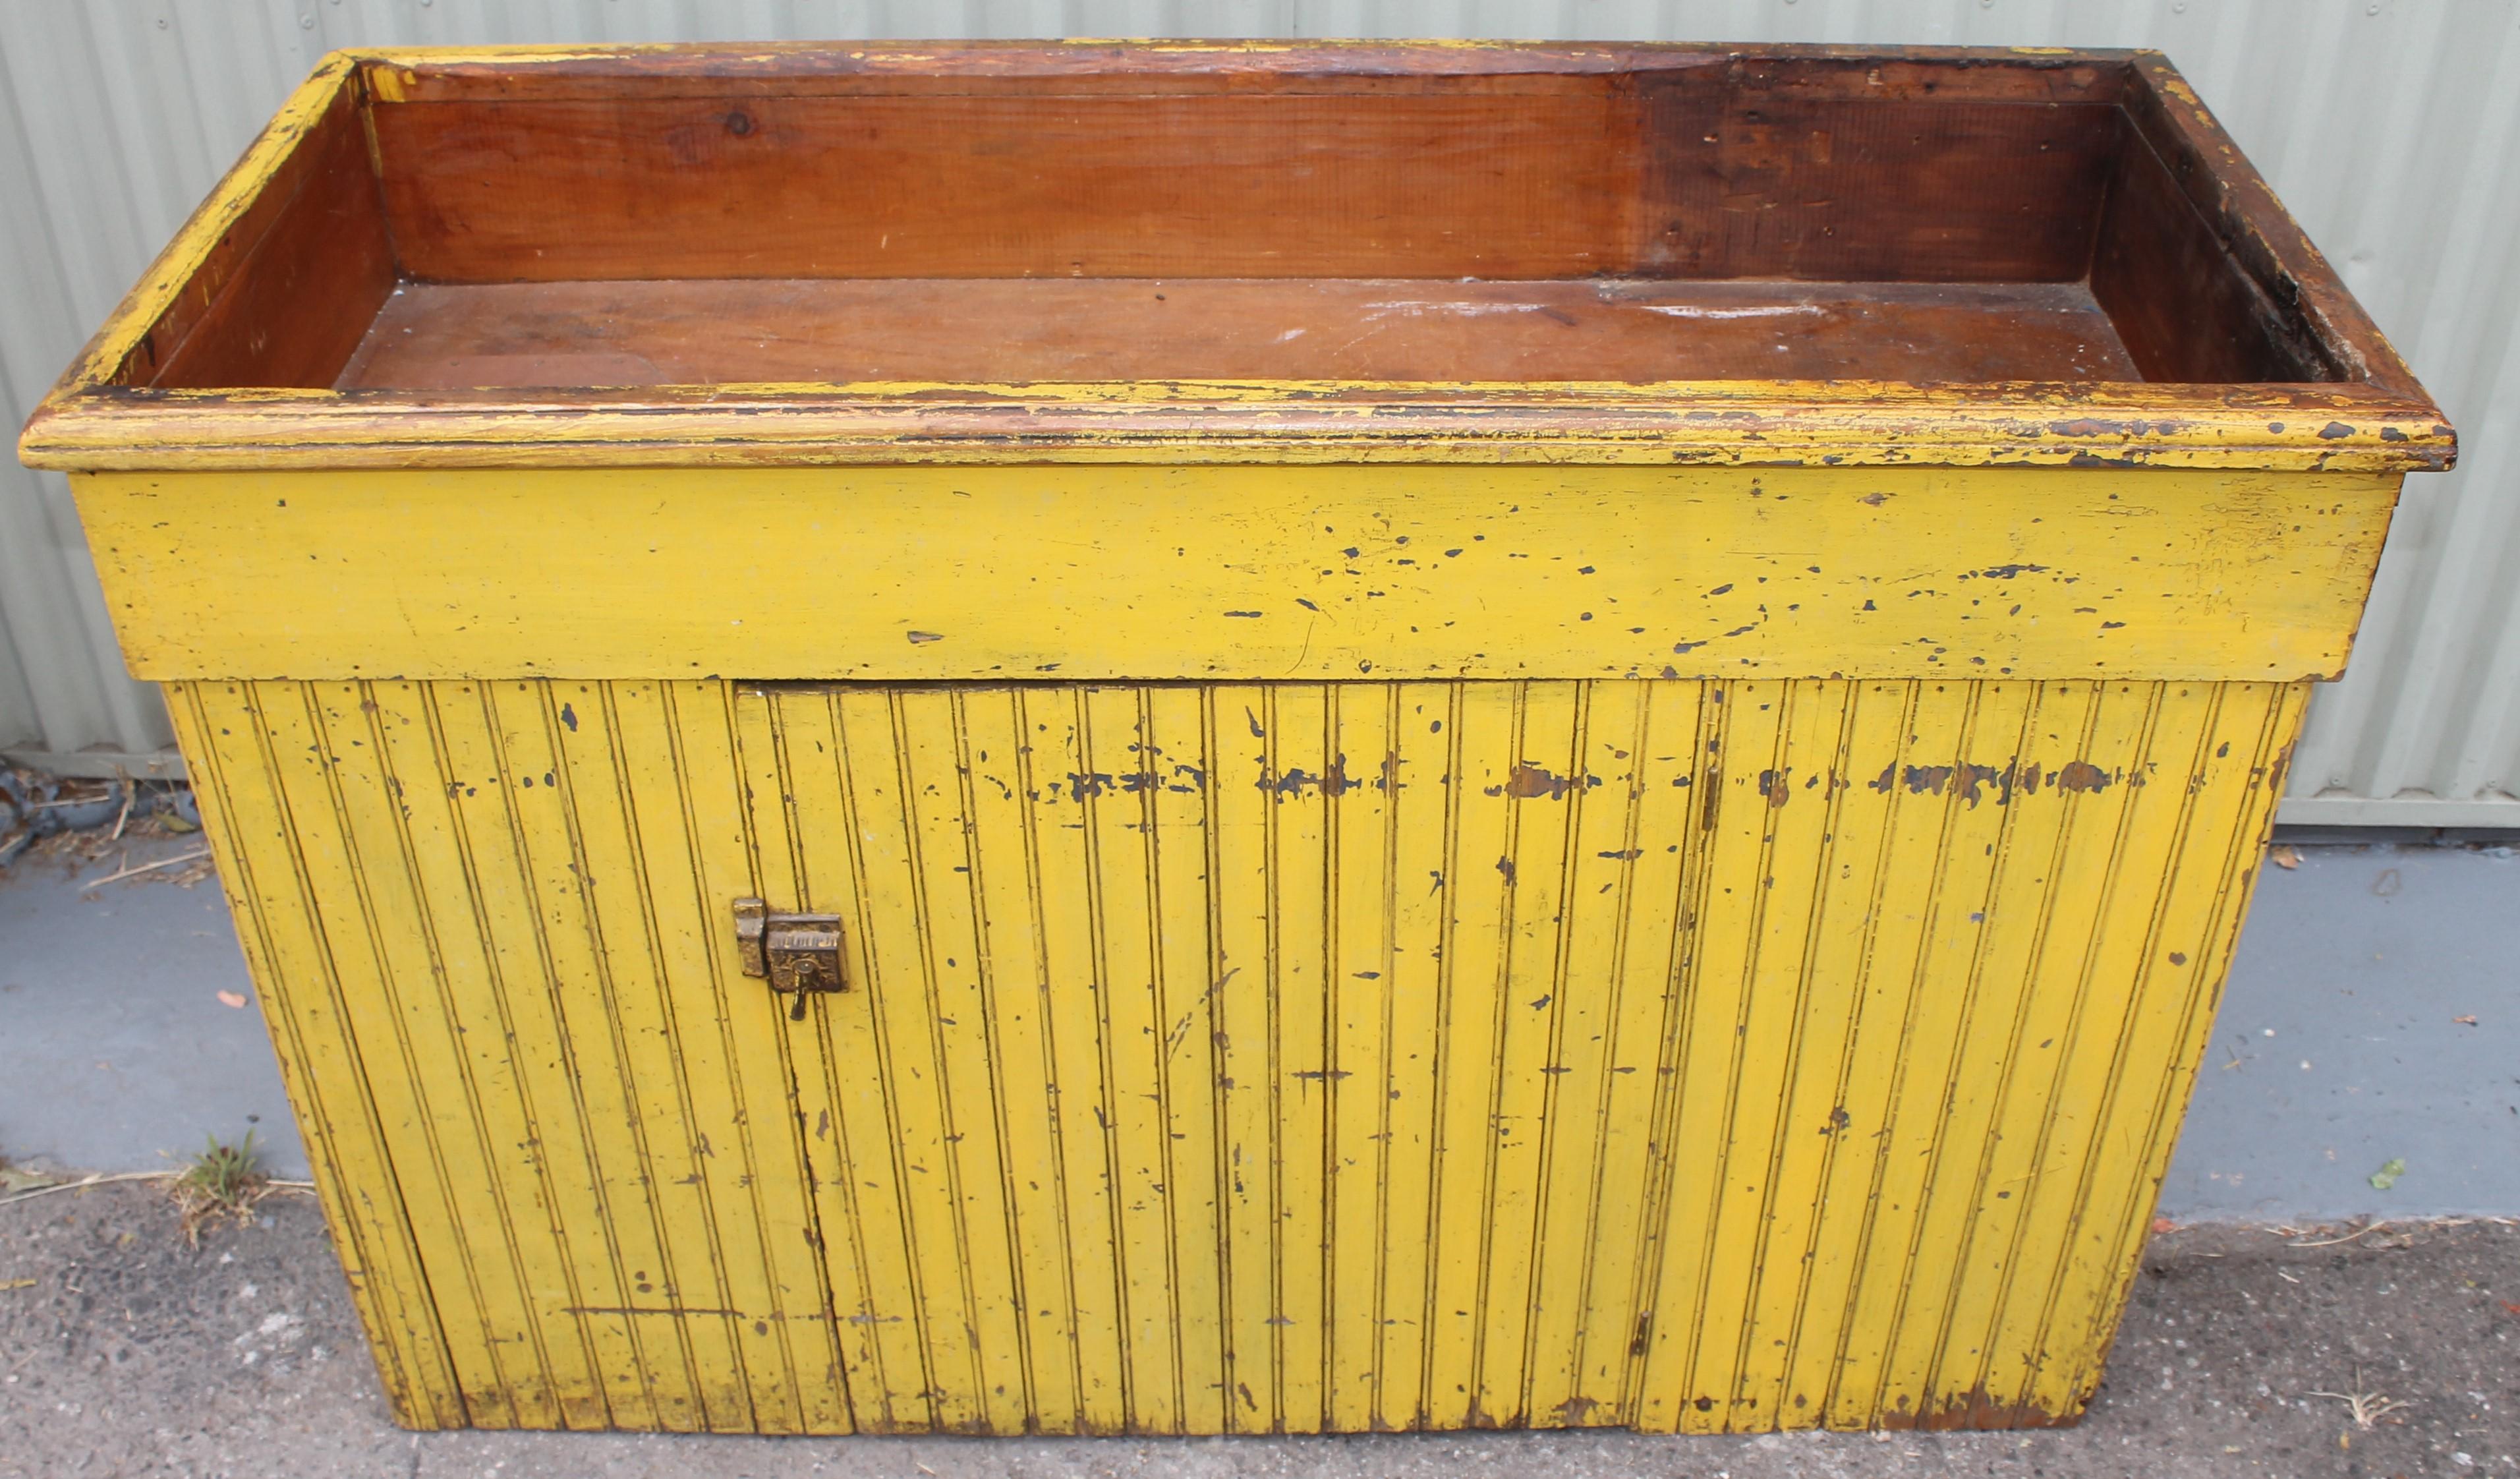 This 19th c original painted chrome yellow dry sink that is made with a wainscoting pine and painted all around the outside. The interior is painted in a salmon painted surface. The chrome yellow is painted over a grey / blue base coat paint.